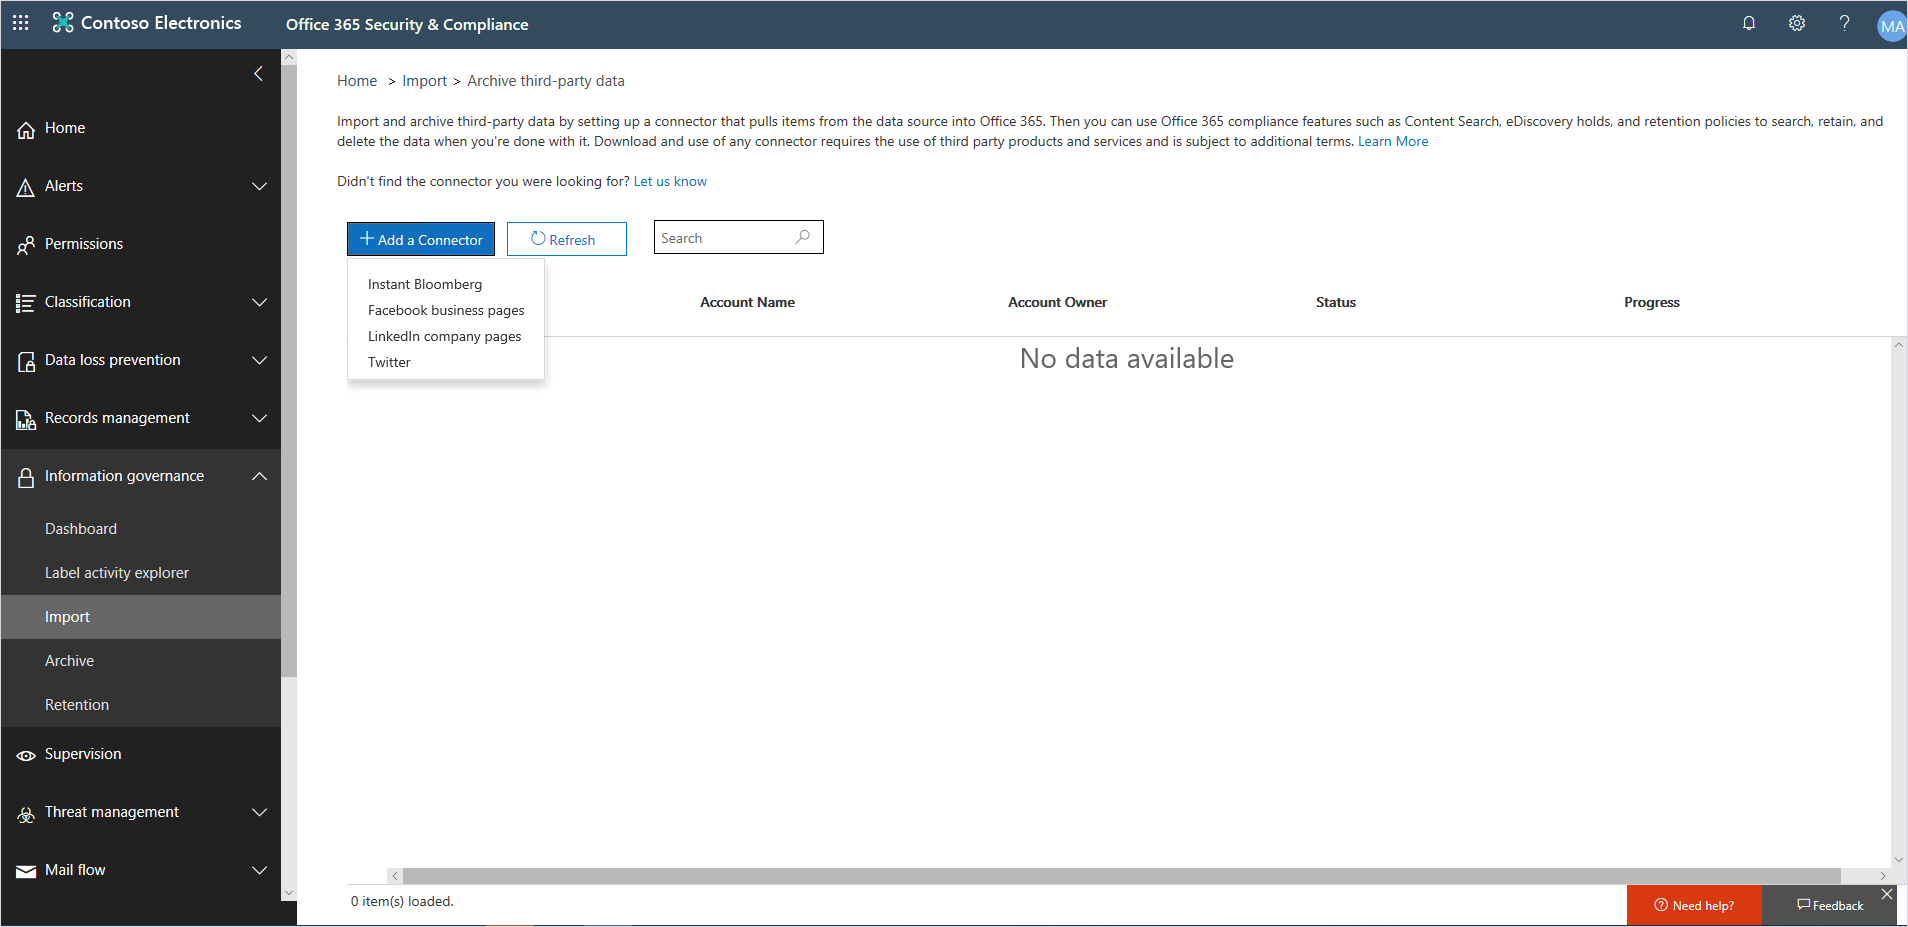 Screenshot of a connector being added in the Office 365 Security & Compliance dashboard.